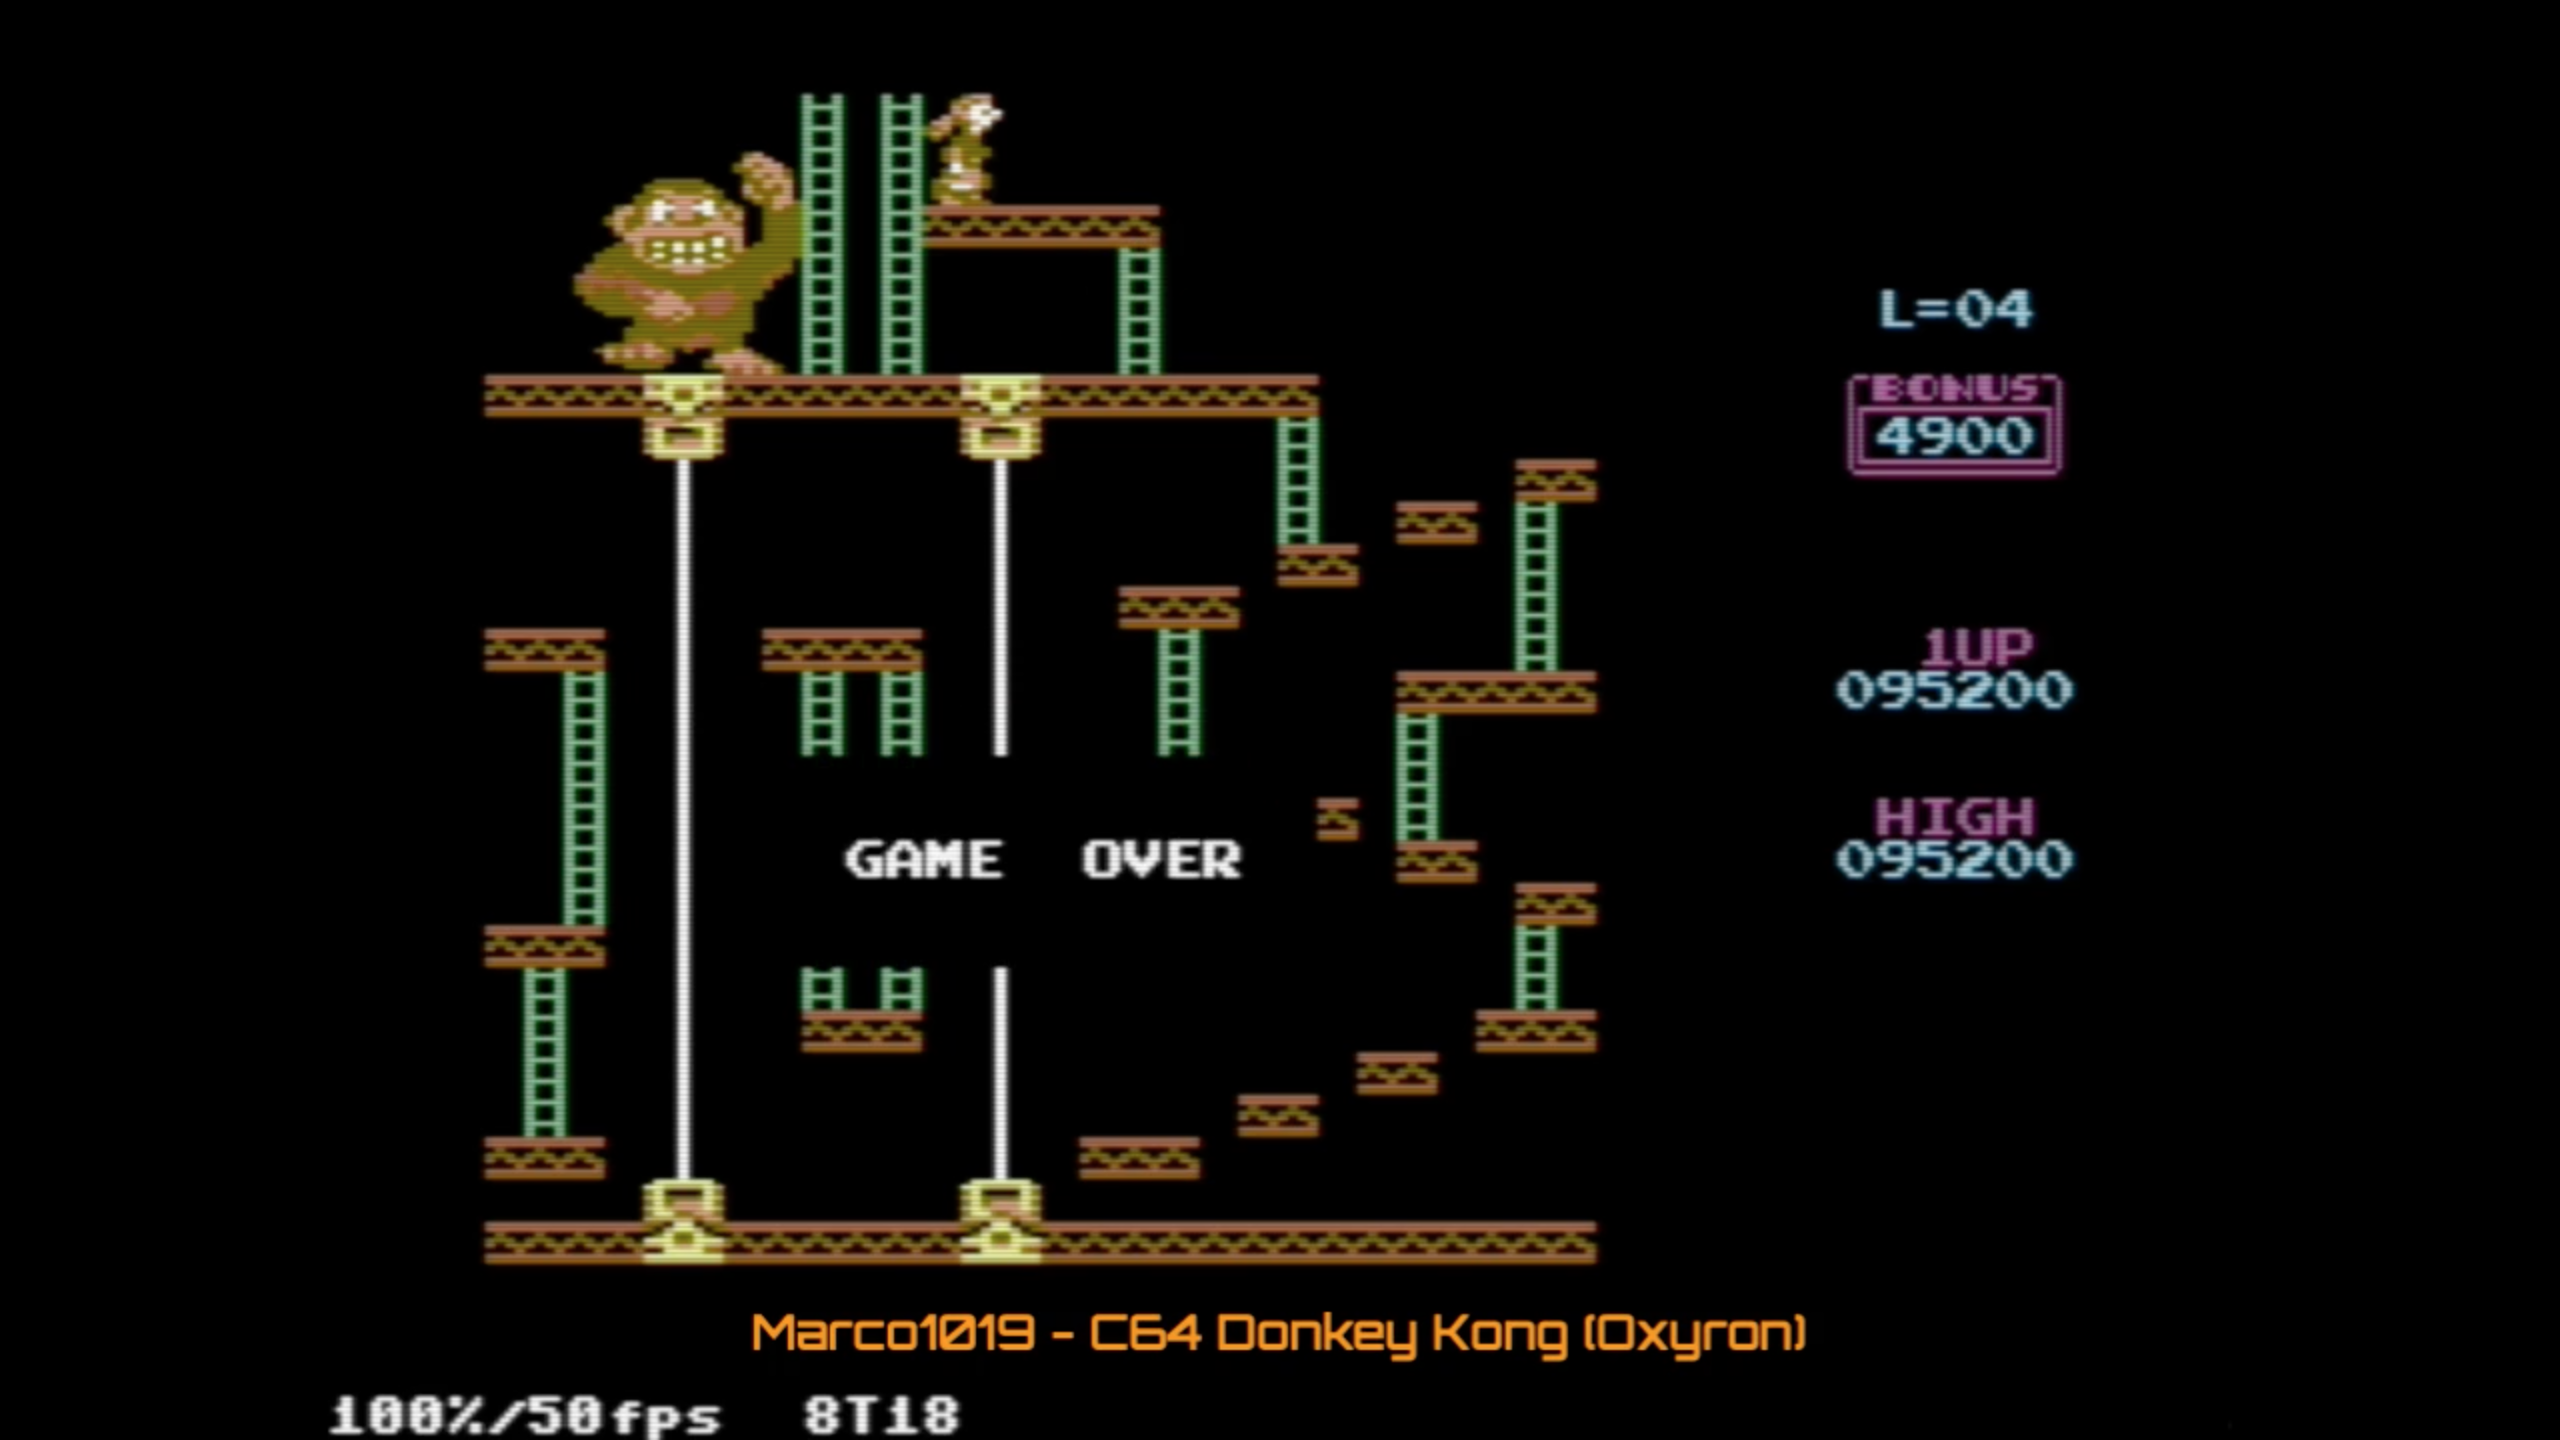 Marco1019: Donkey Kong 2016 (Commodore 64 Emulated) 95,200 points on 2020-10-17 12:36:06